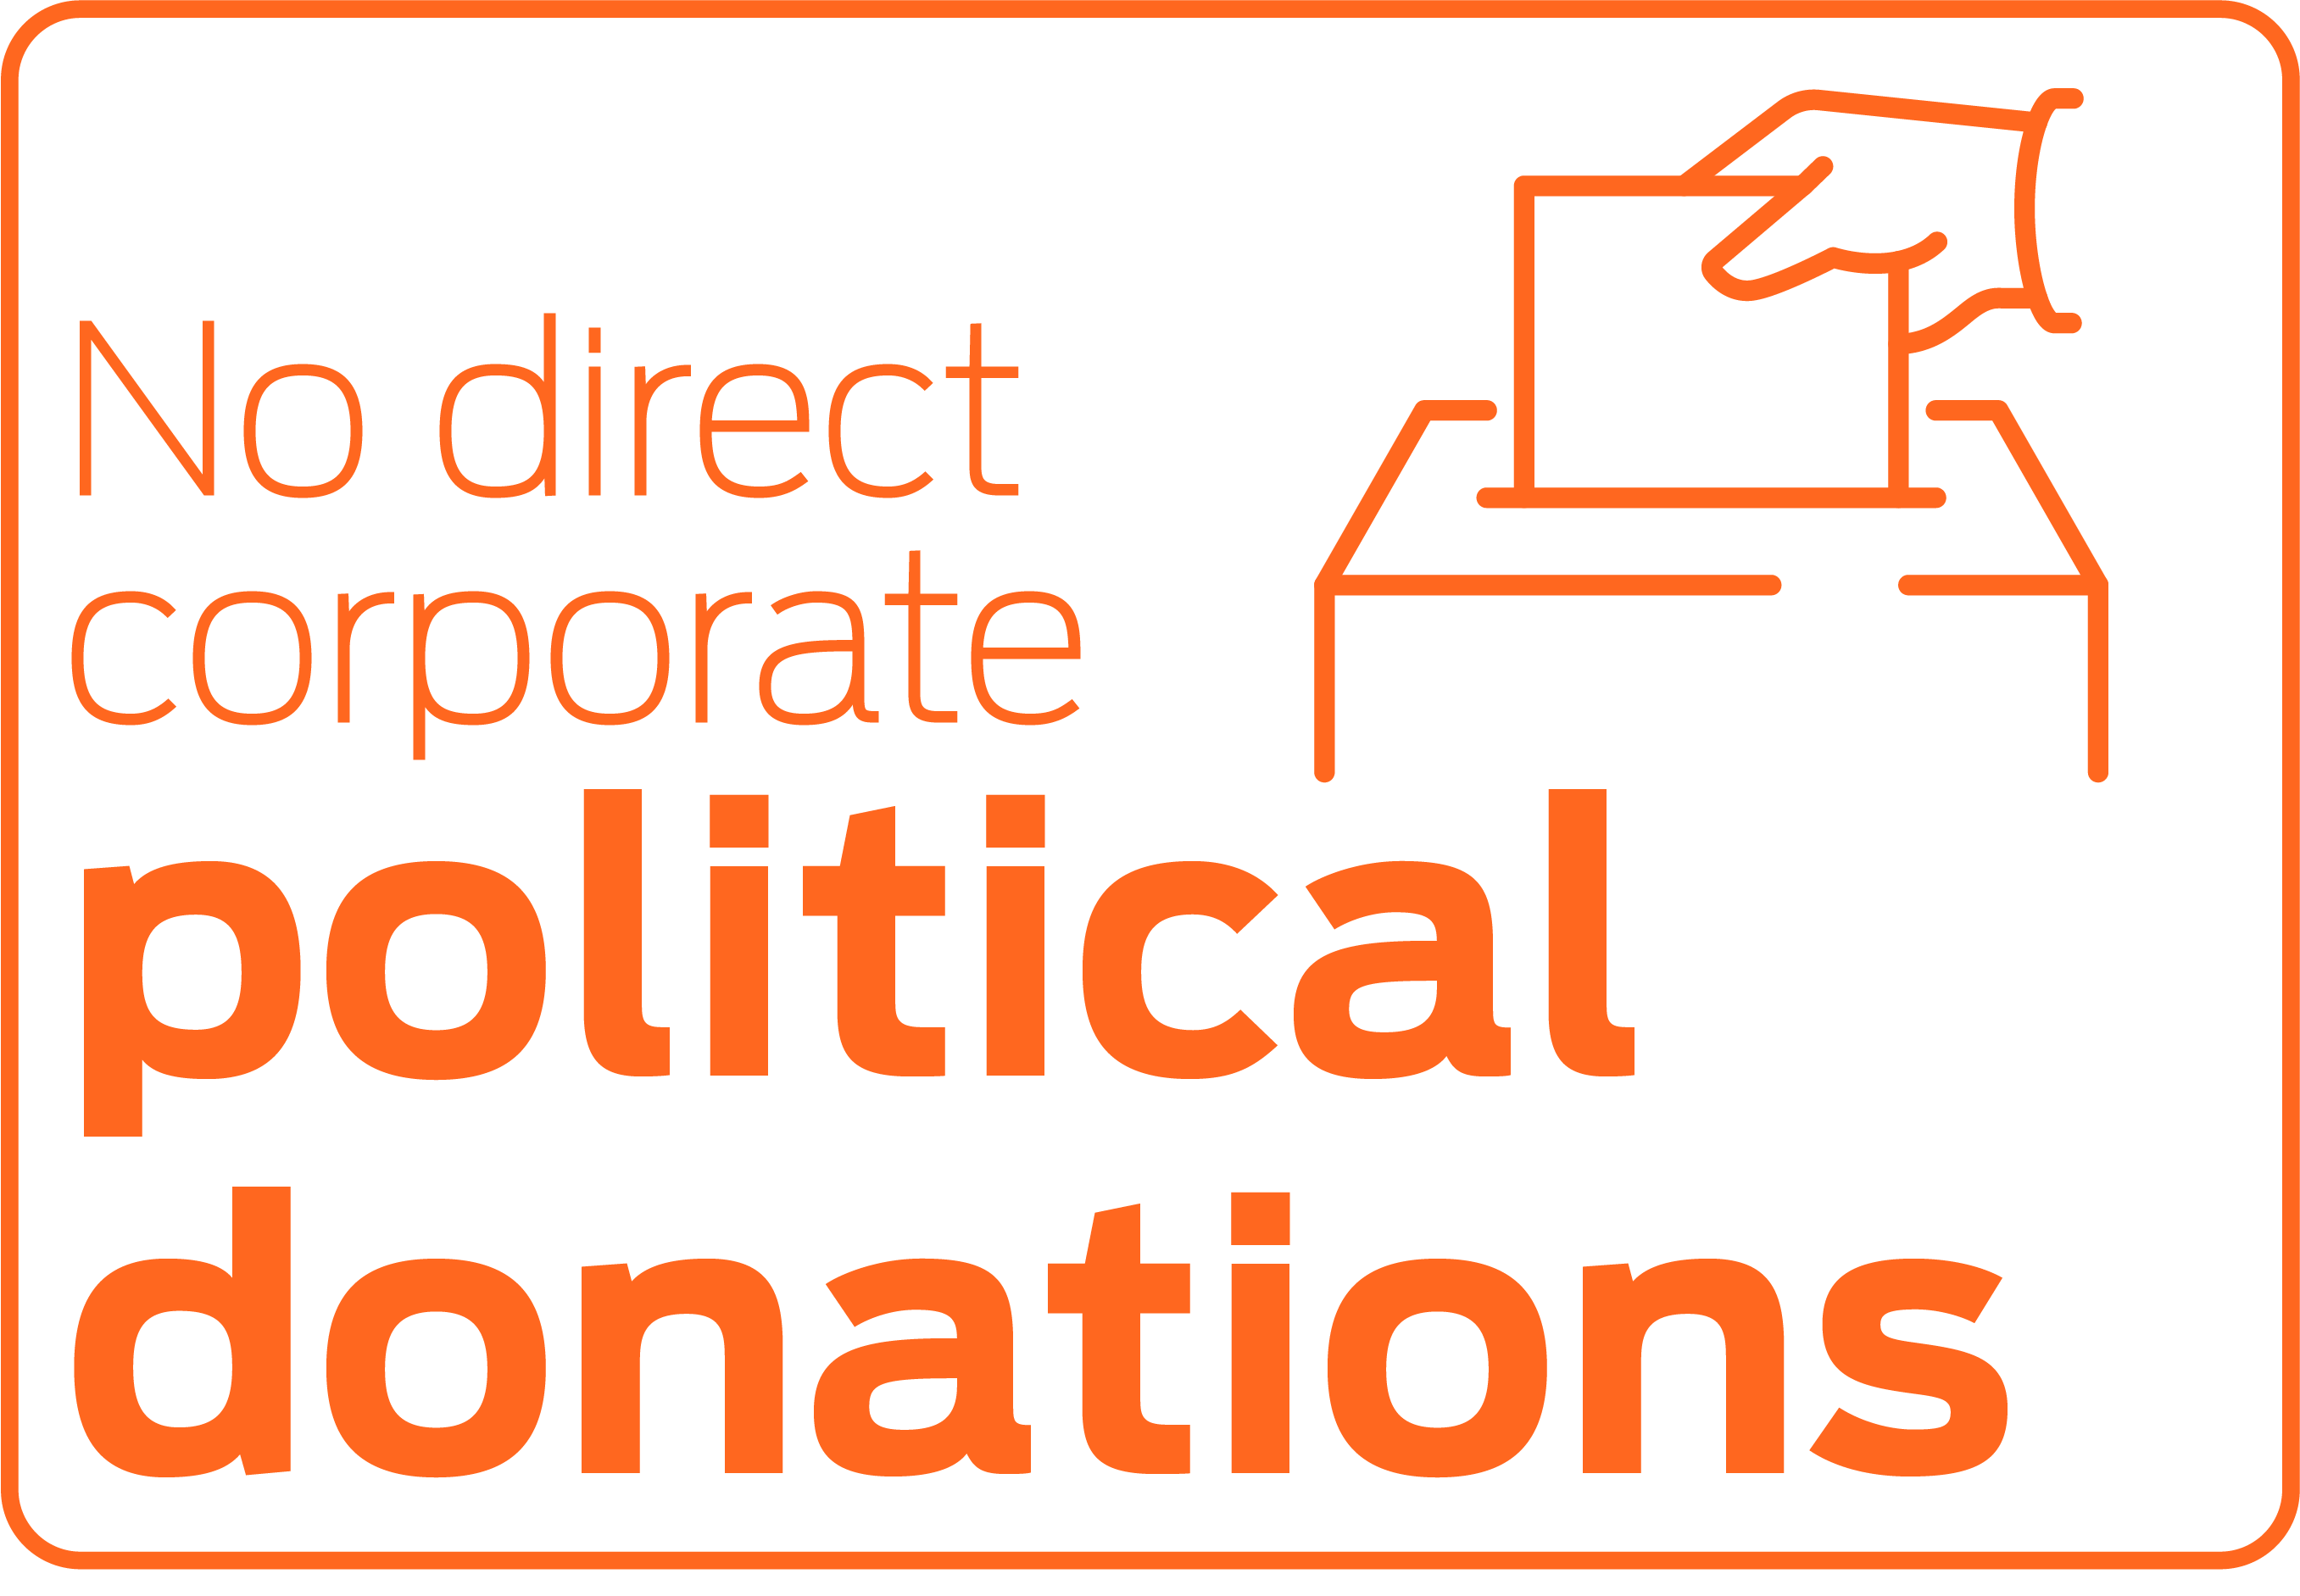 No direct corporate political donations